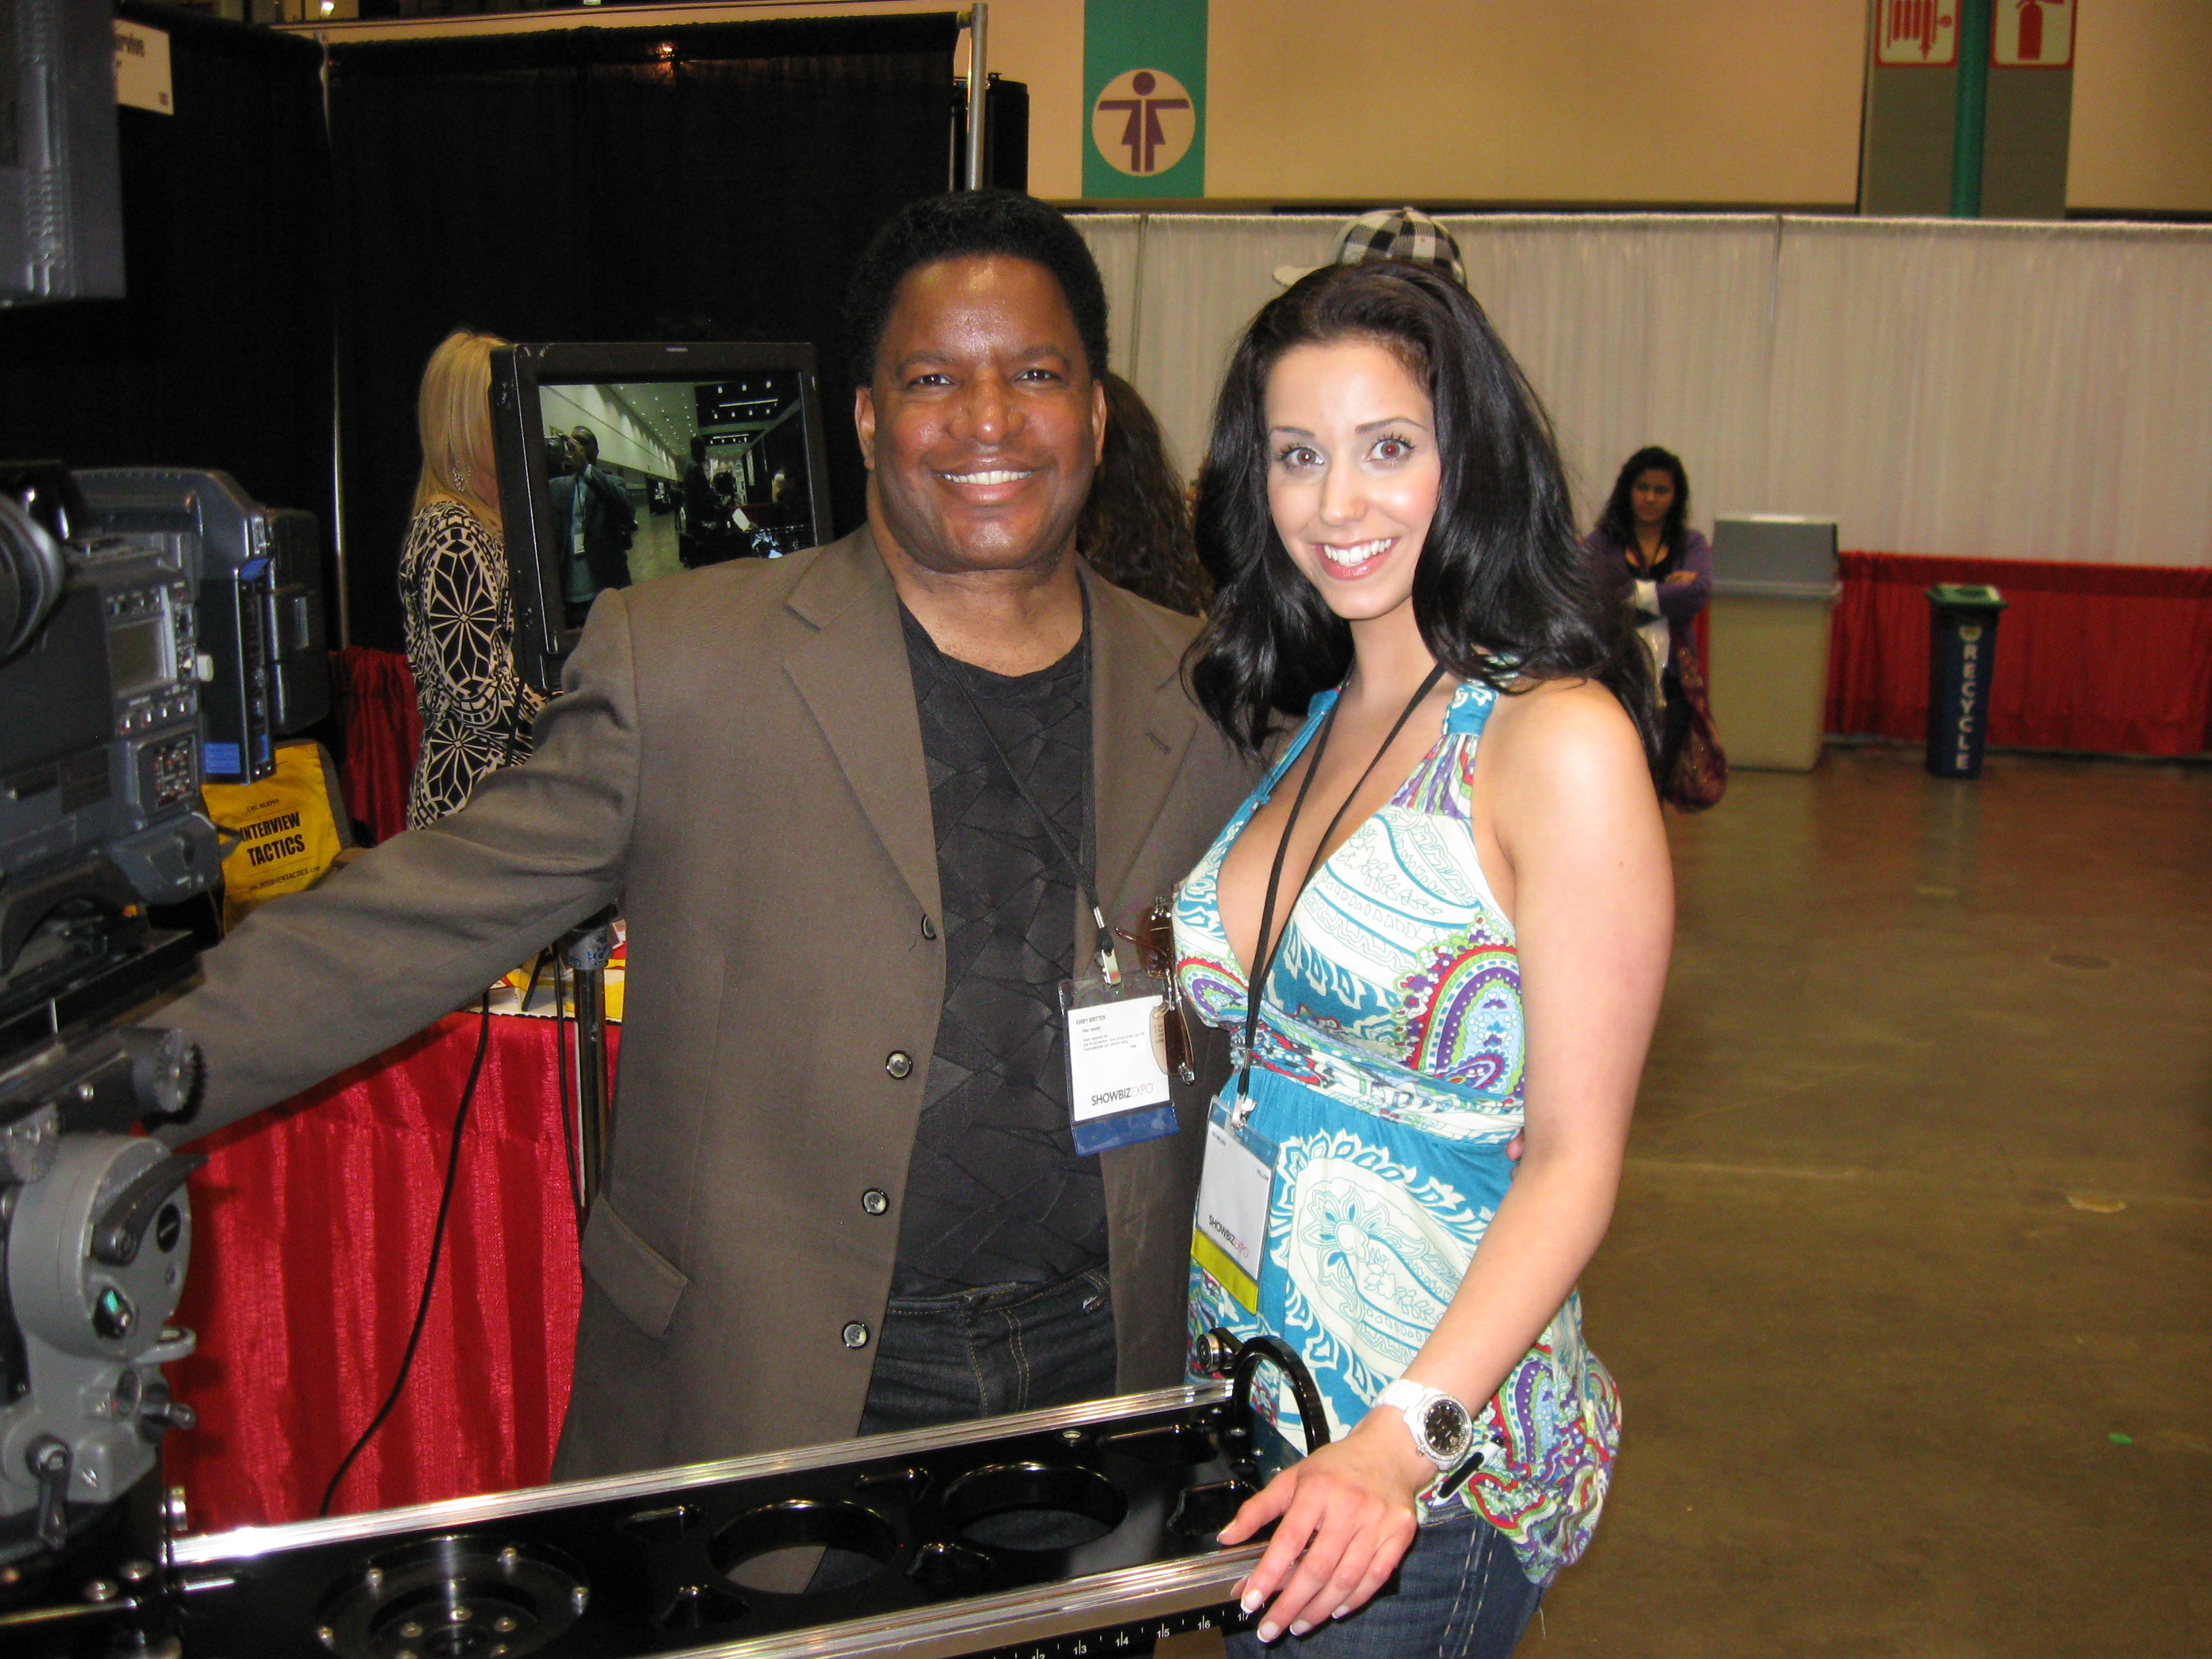 with my friend Sydney at the Expo.